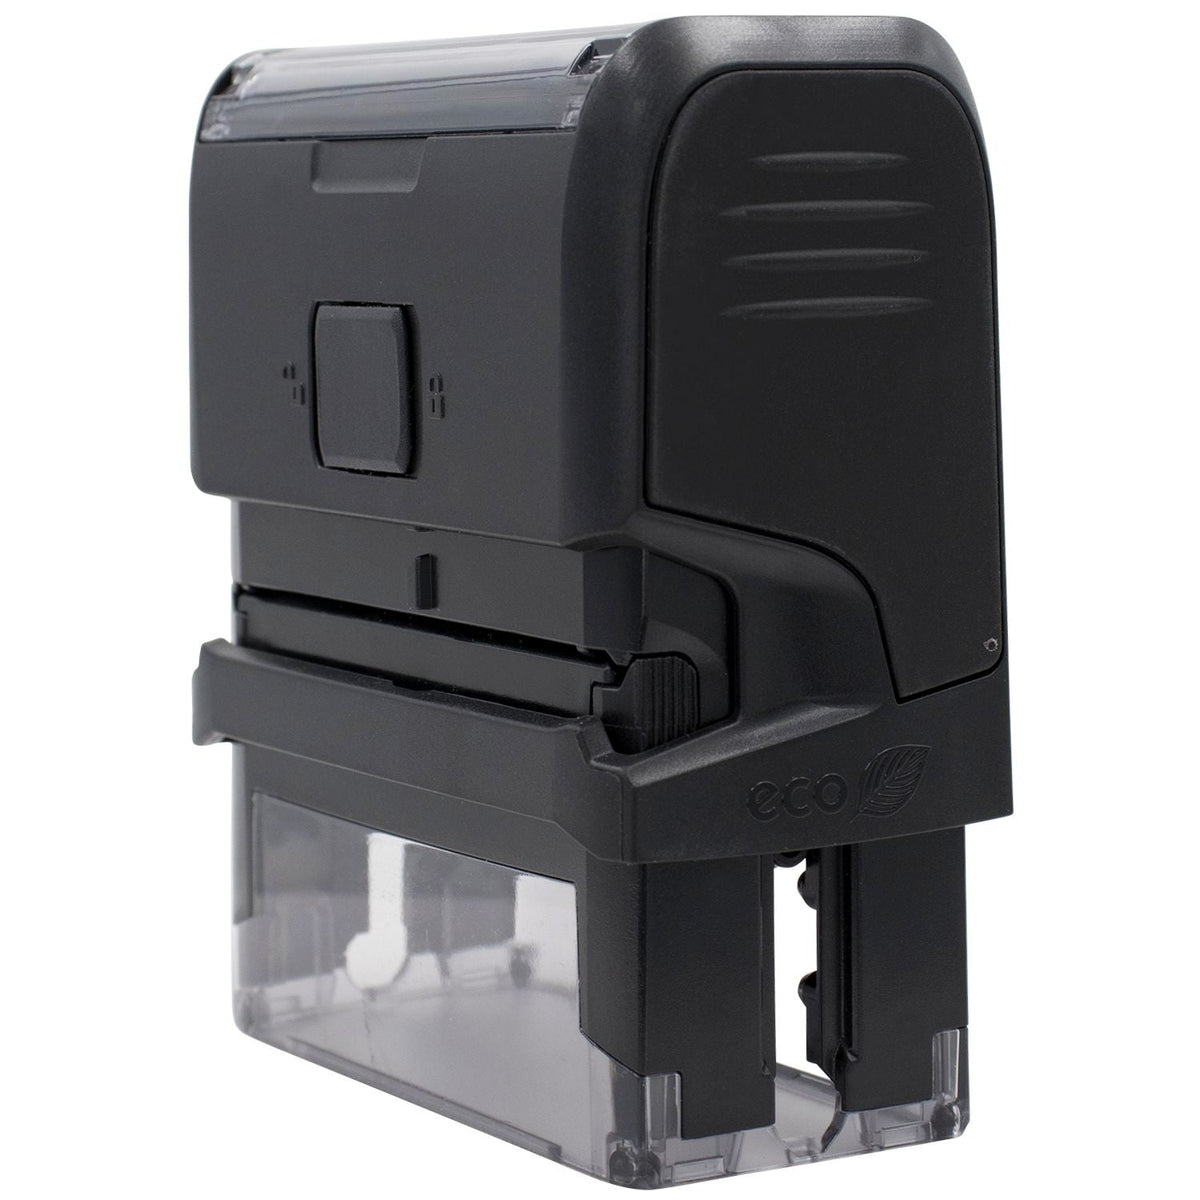 Side View of Large Self Inking Trust Stamp at an Angle